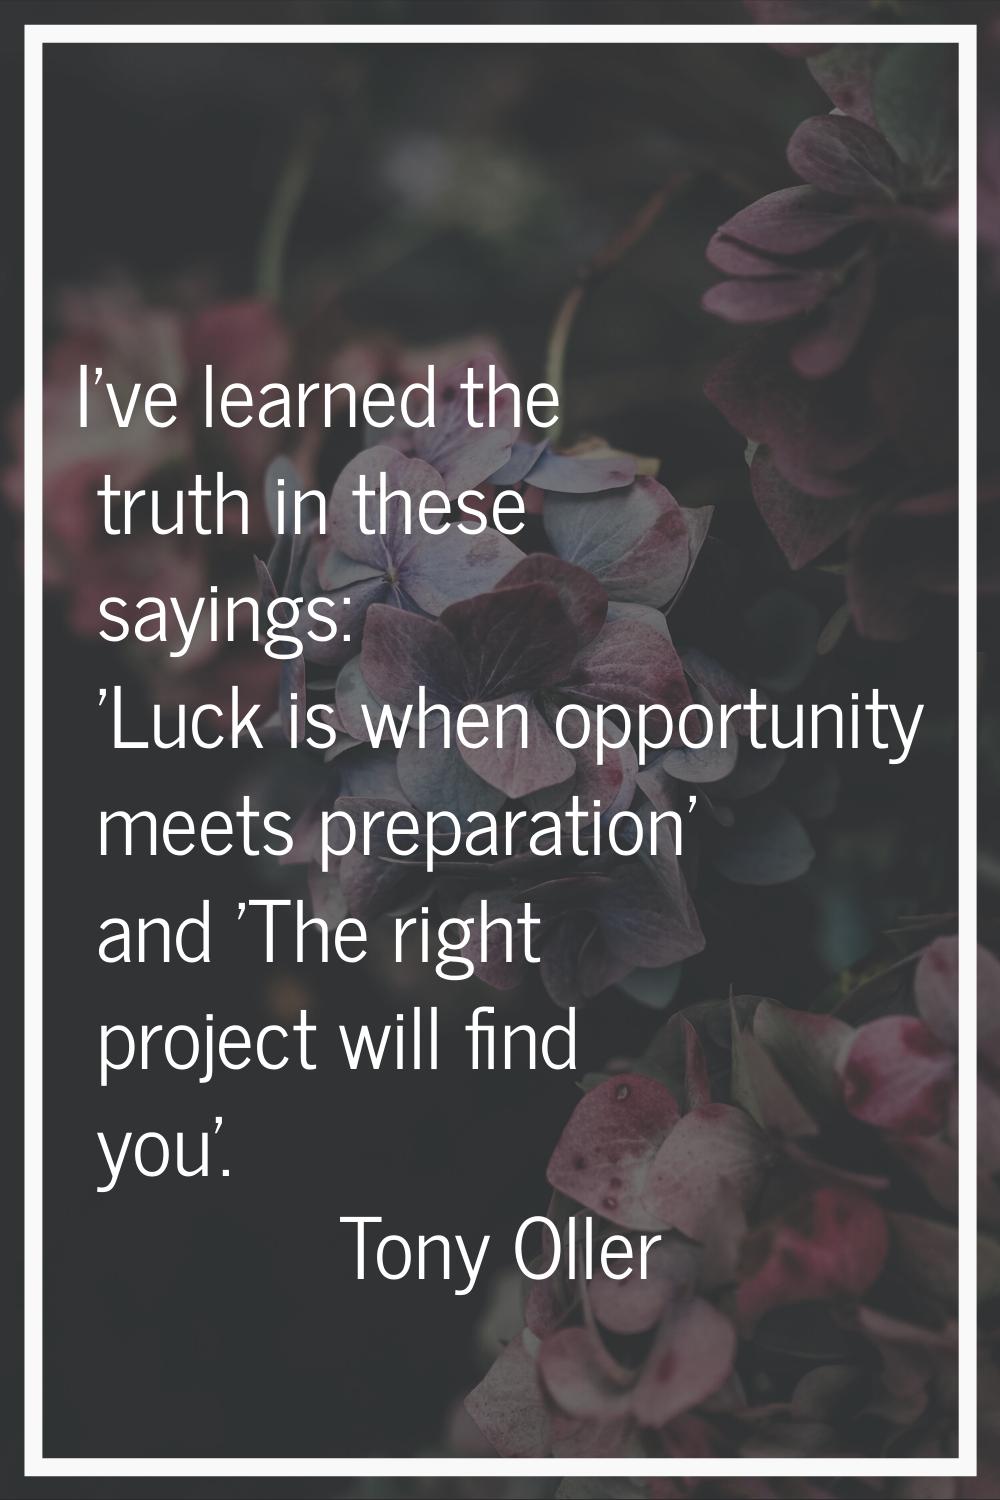 I've learned the truth in these sayings: 'Luck is when opportunity meets preparation' and 'The righ